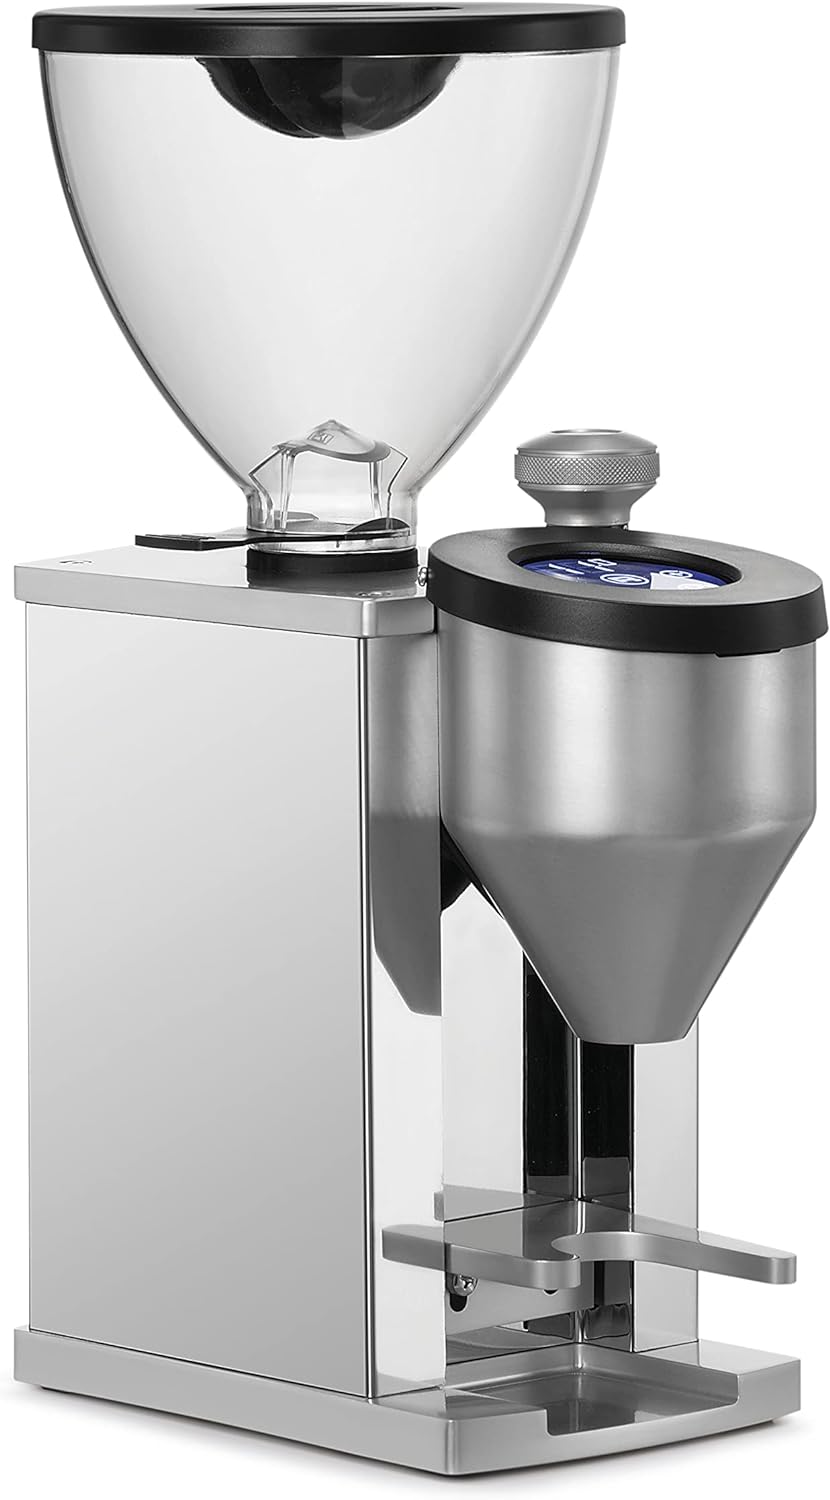 Rocket Faustino Coffee Grinder Chrome Compact Coffee Grinder with Elegant But Simple Design and High Quality